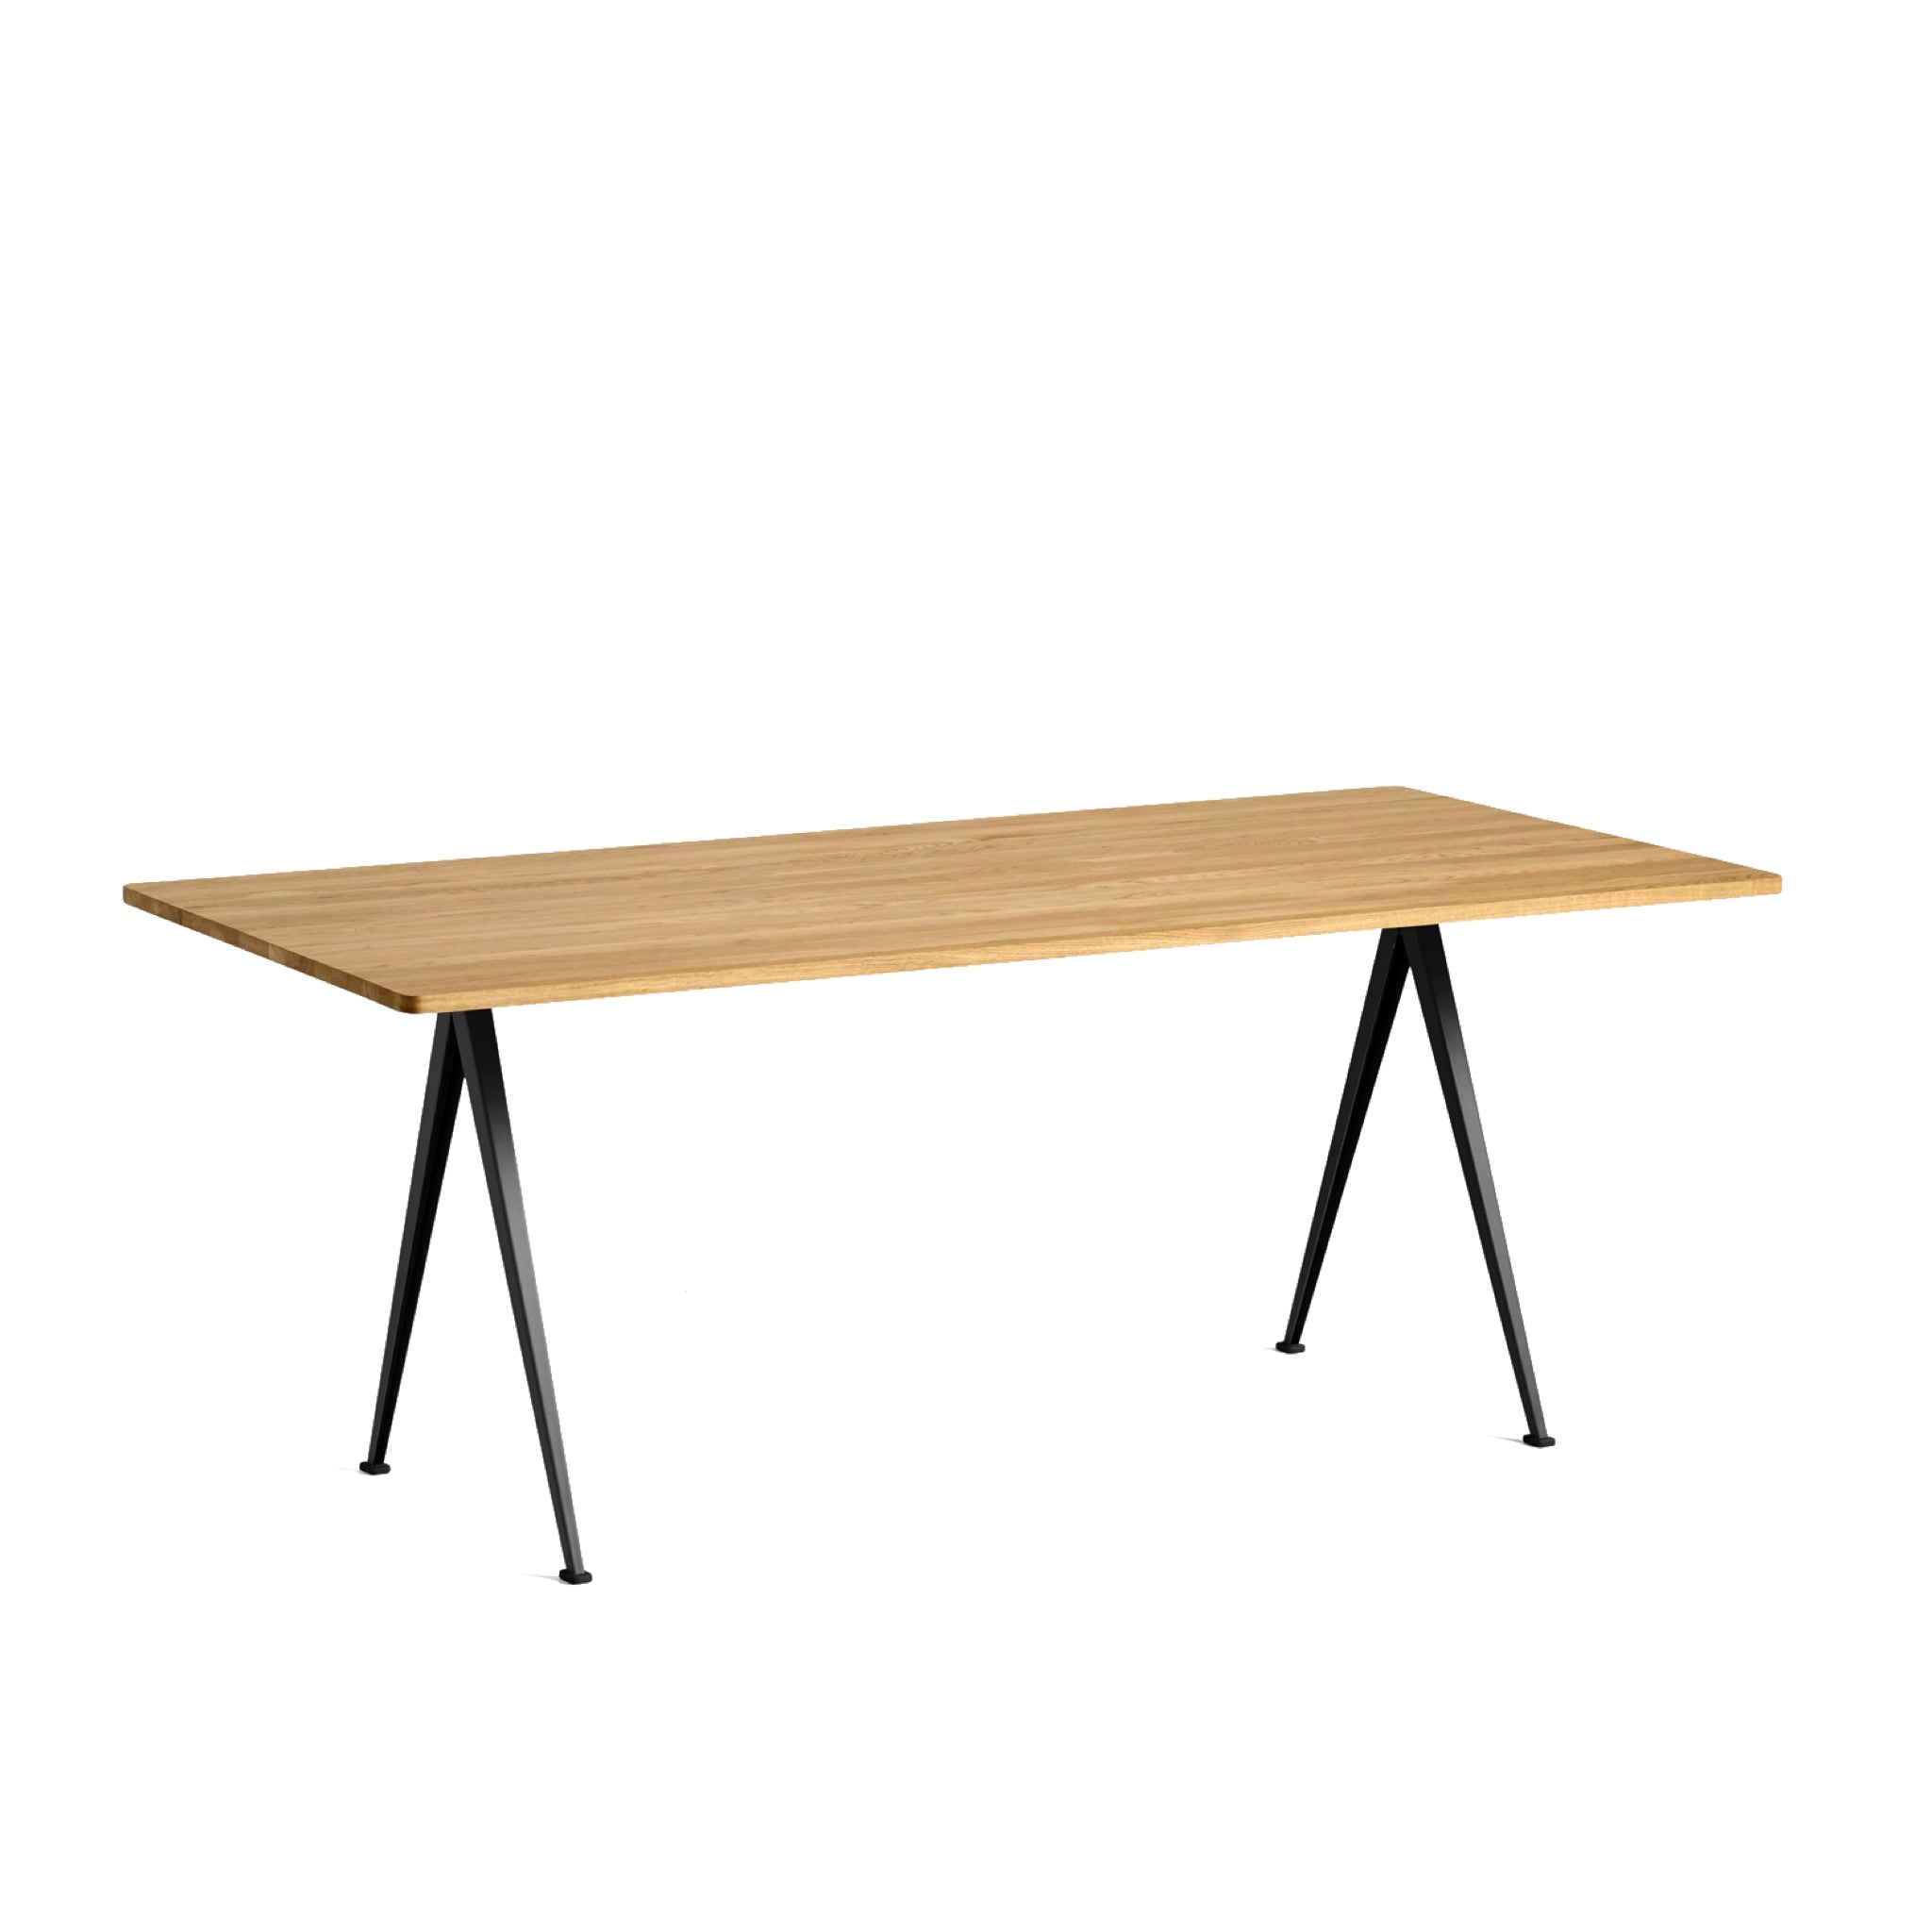 Pyramid Table 02 by Hay